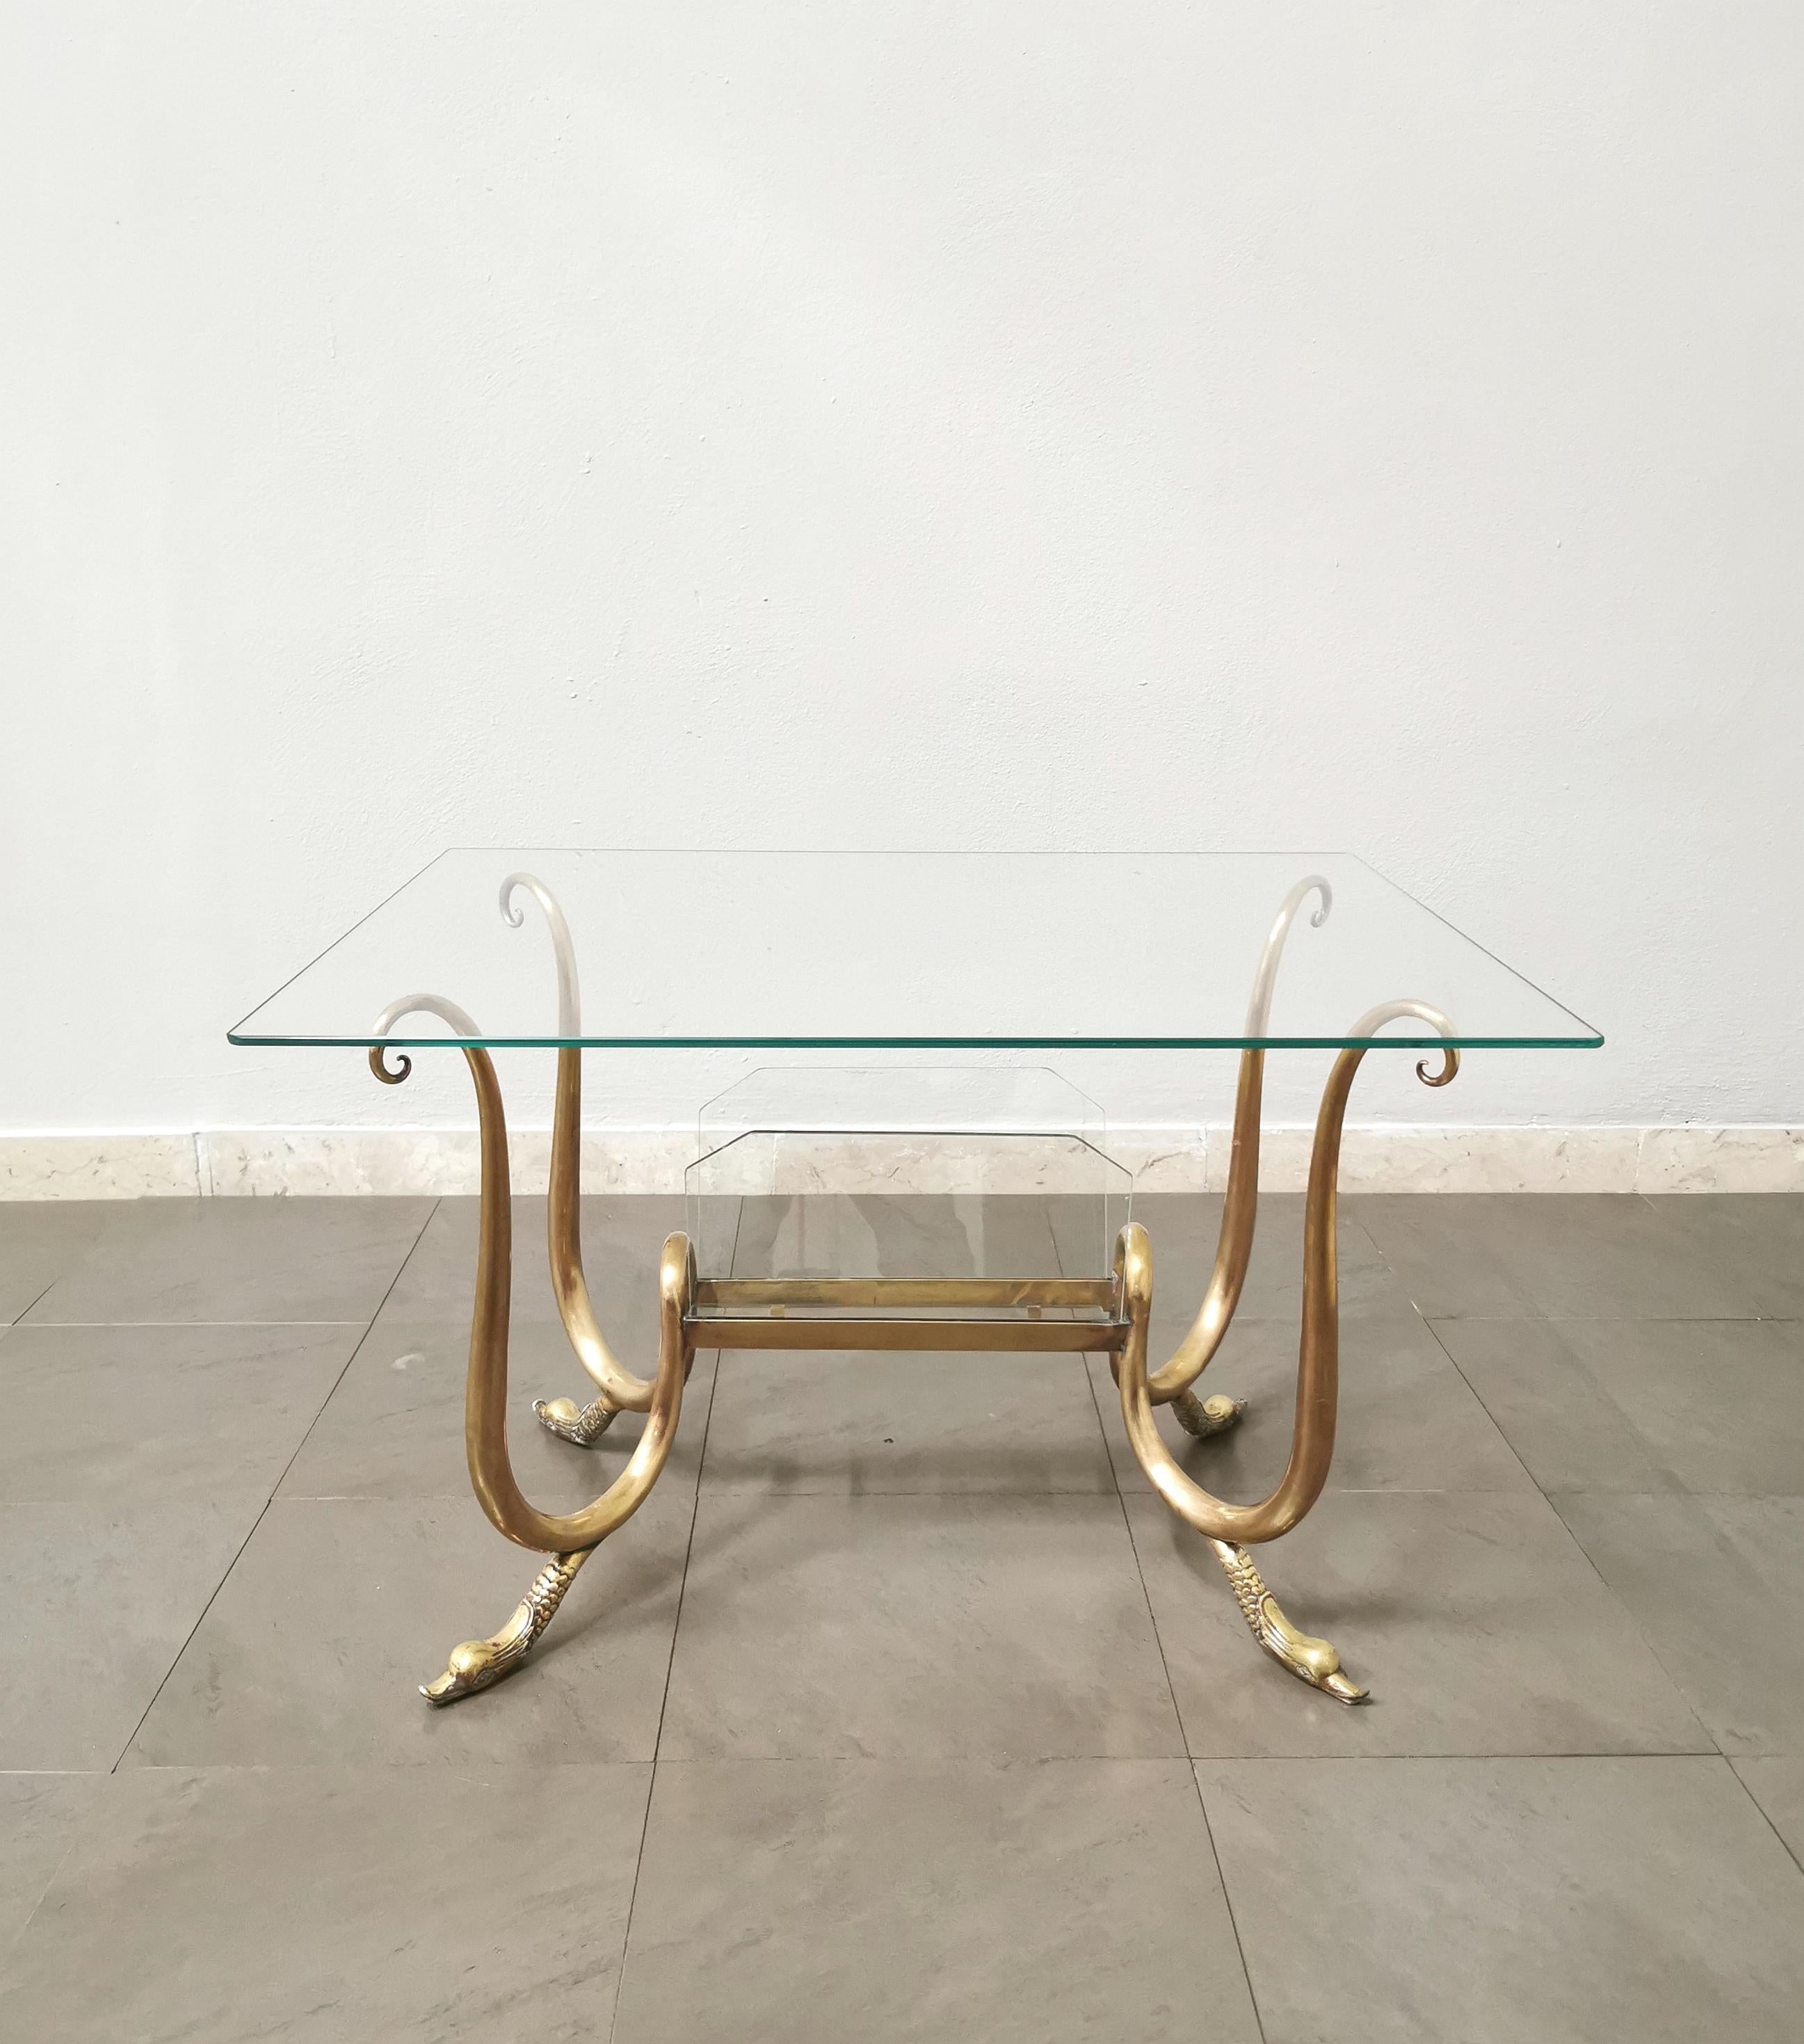 Coffee table or sofa, curved brass structure with swan head-shaped legs and rectangular transparent glass top. Made in Italy in the 40's / 50's.